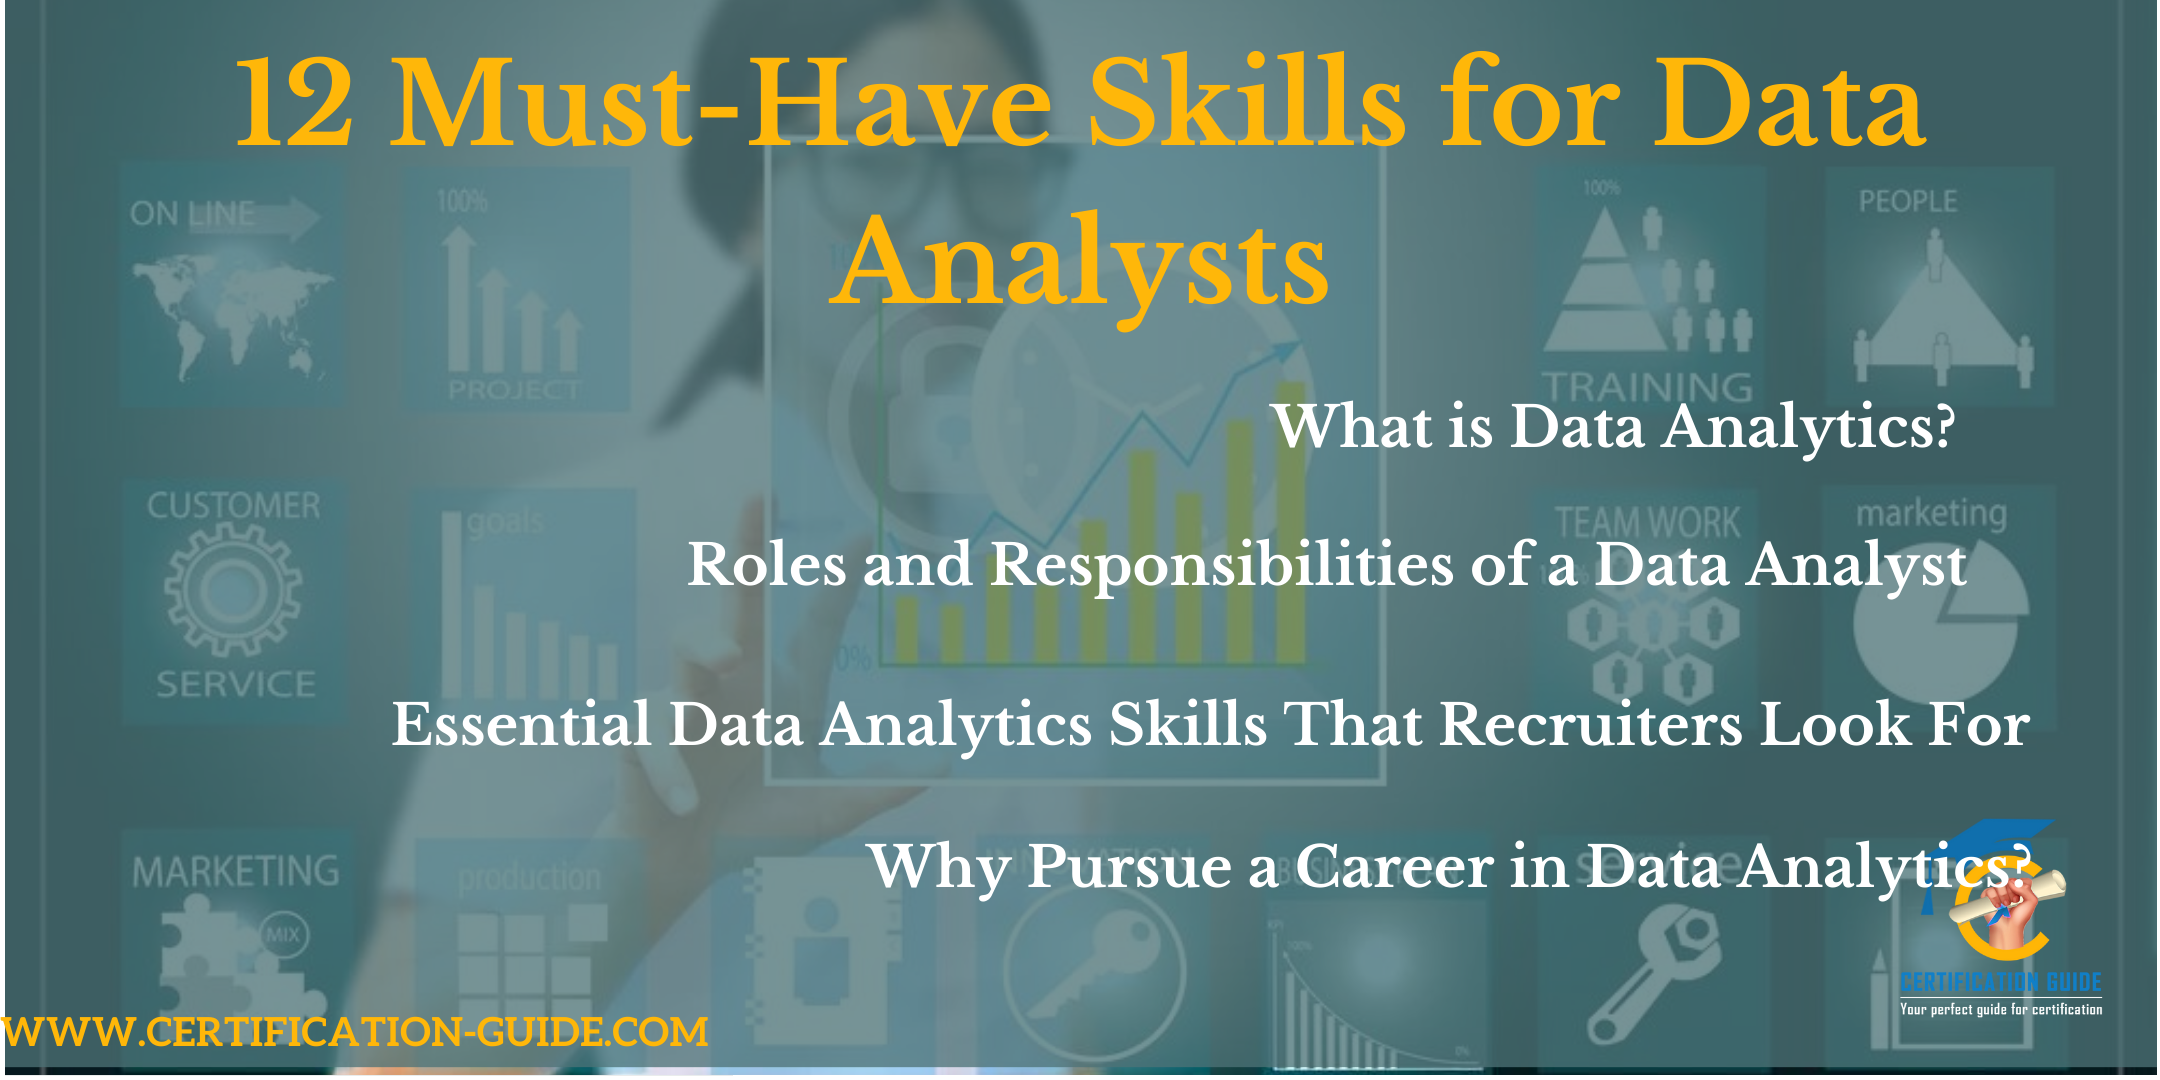 Data Analysts : 12 Must-Have Skills